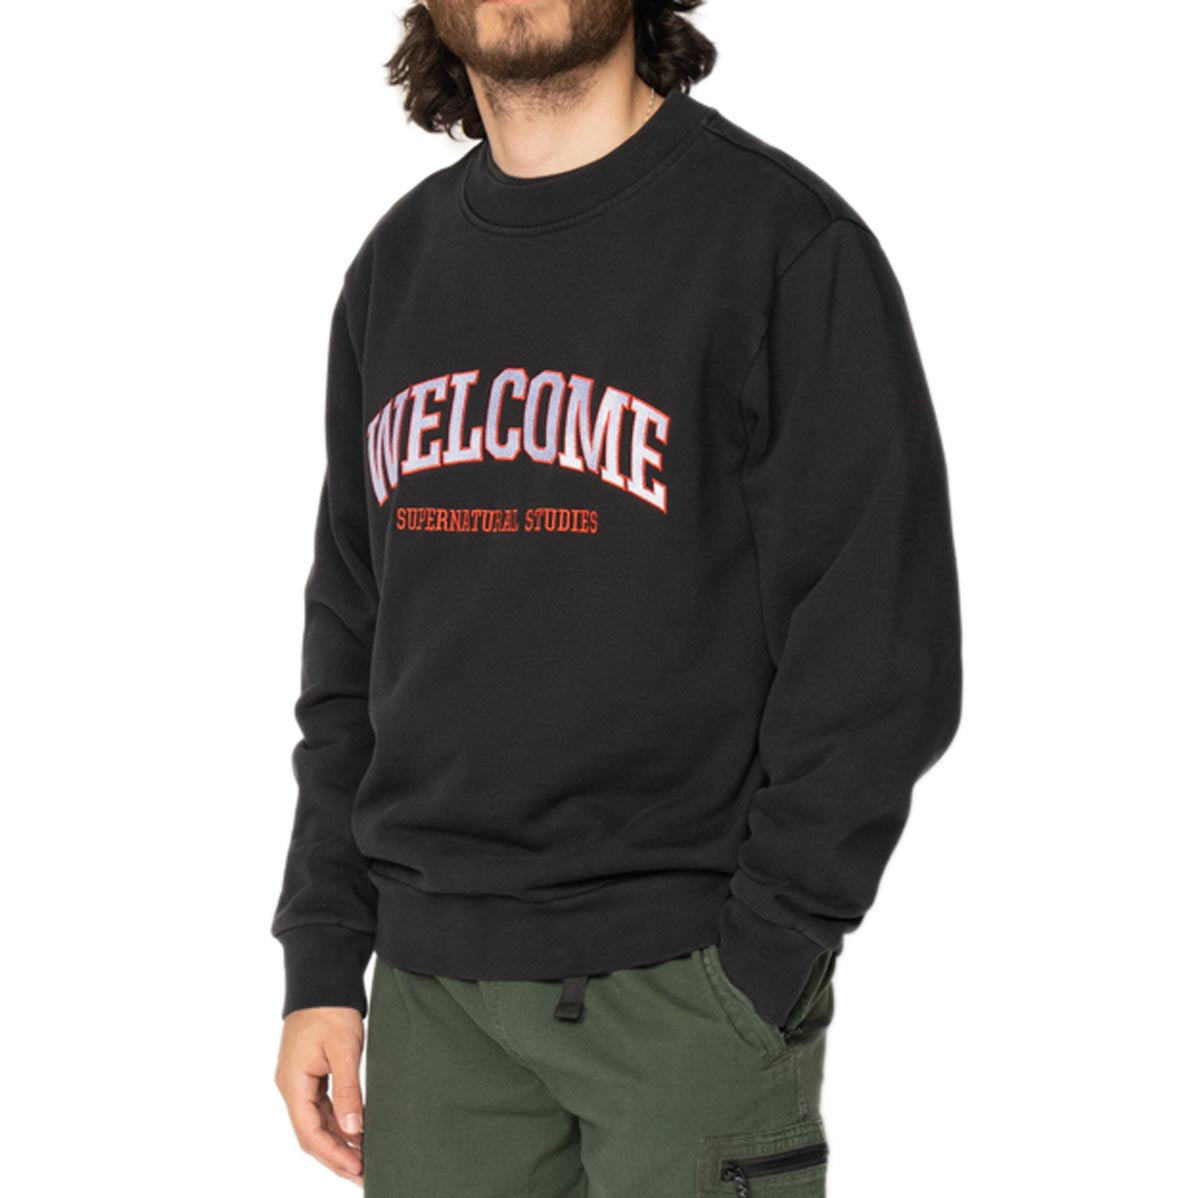 Welcome Student Embd Pigment Dyed Crew Sweater - Black image 2